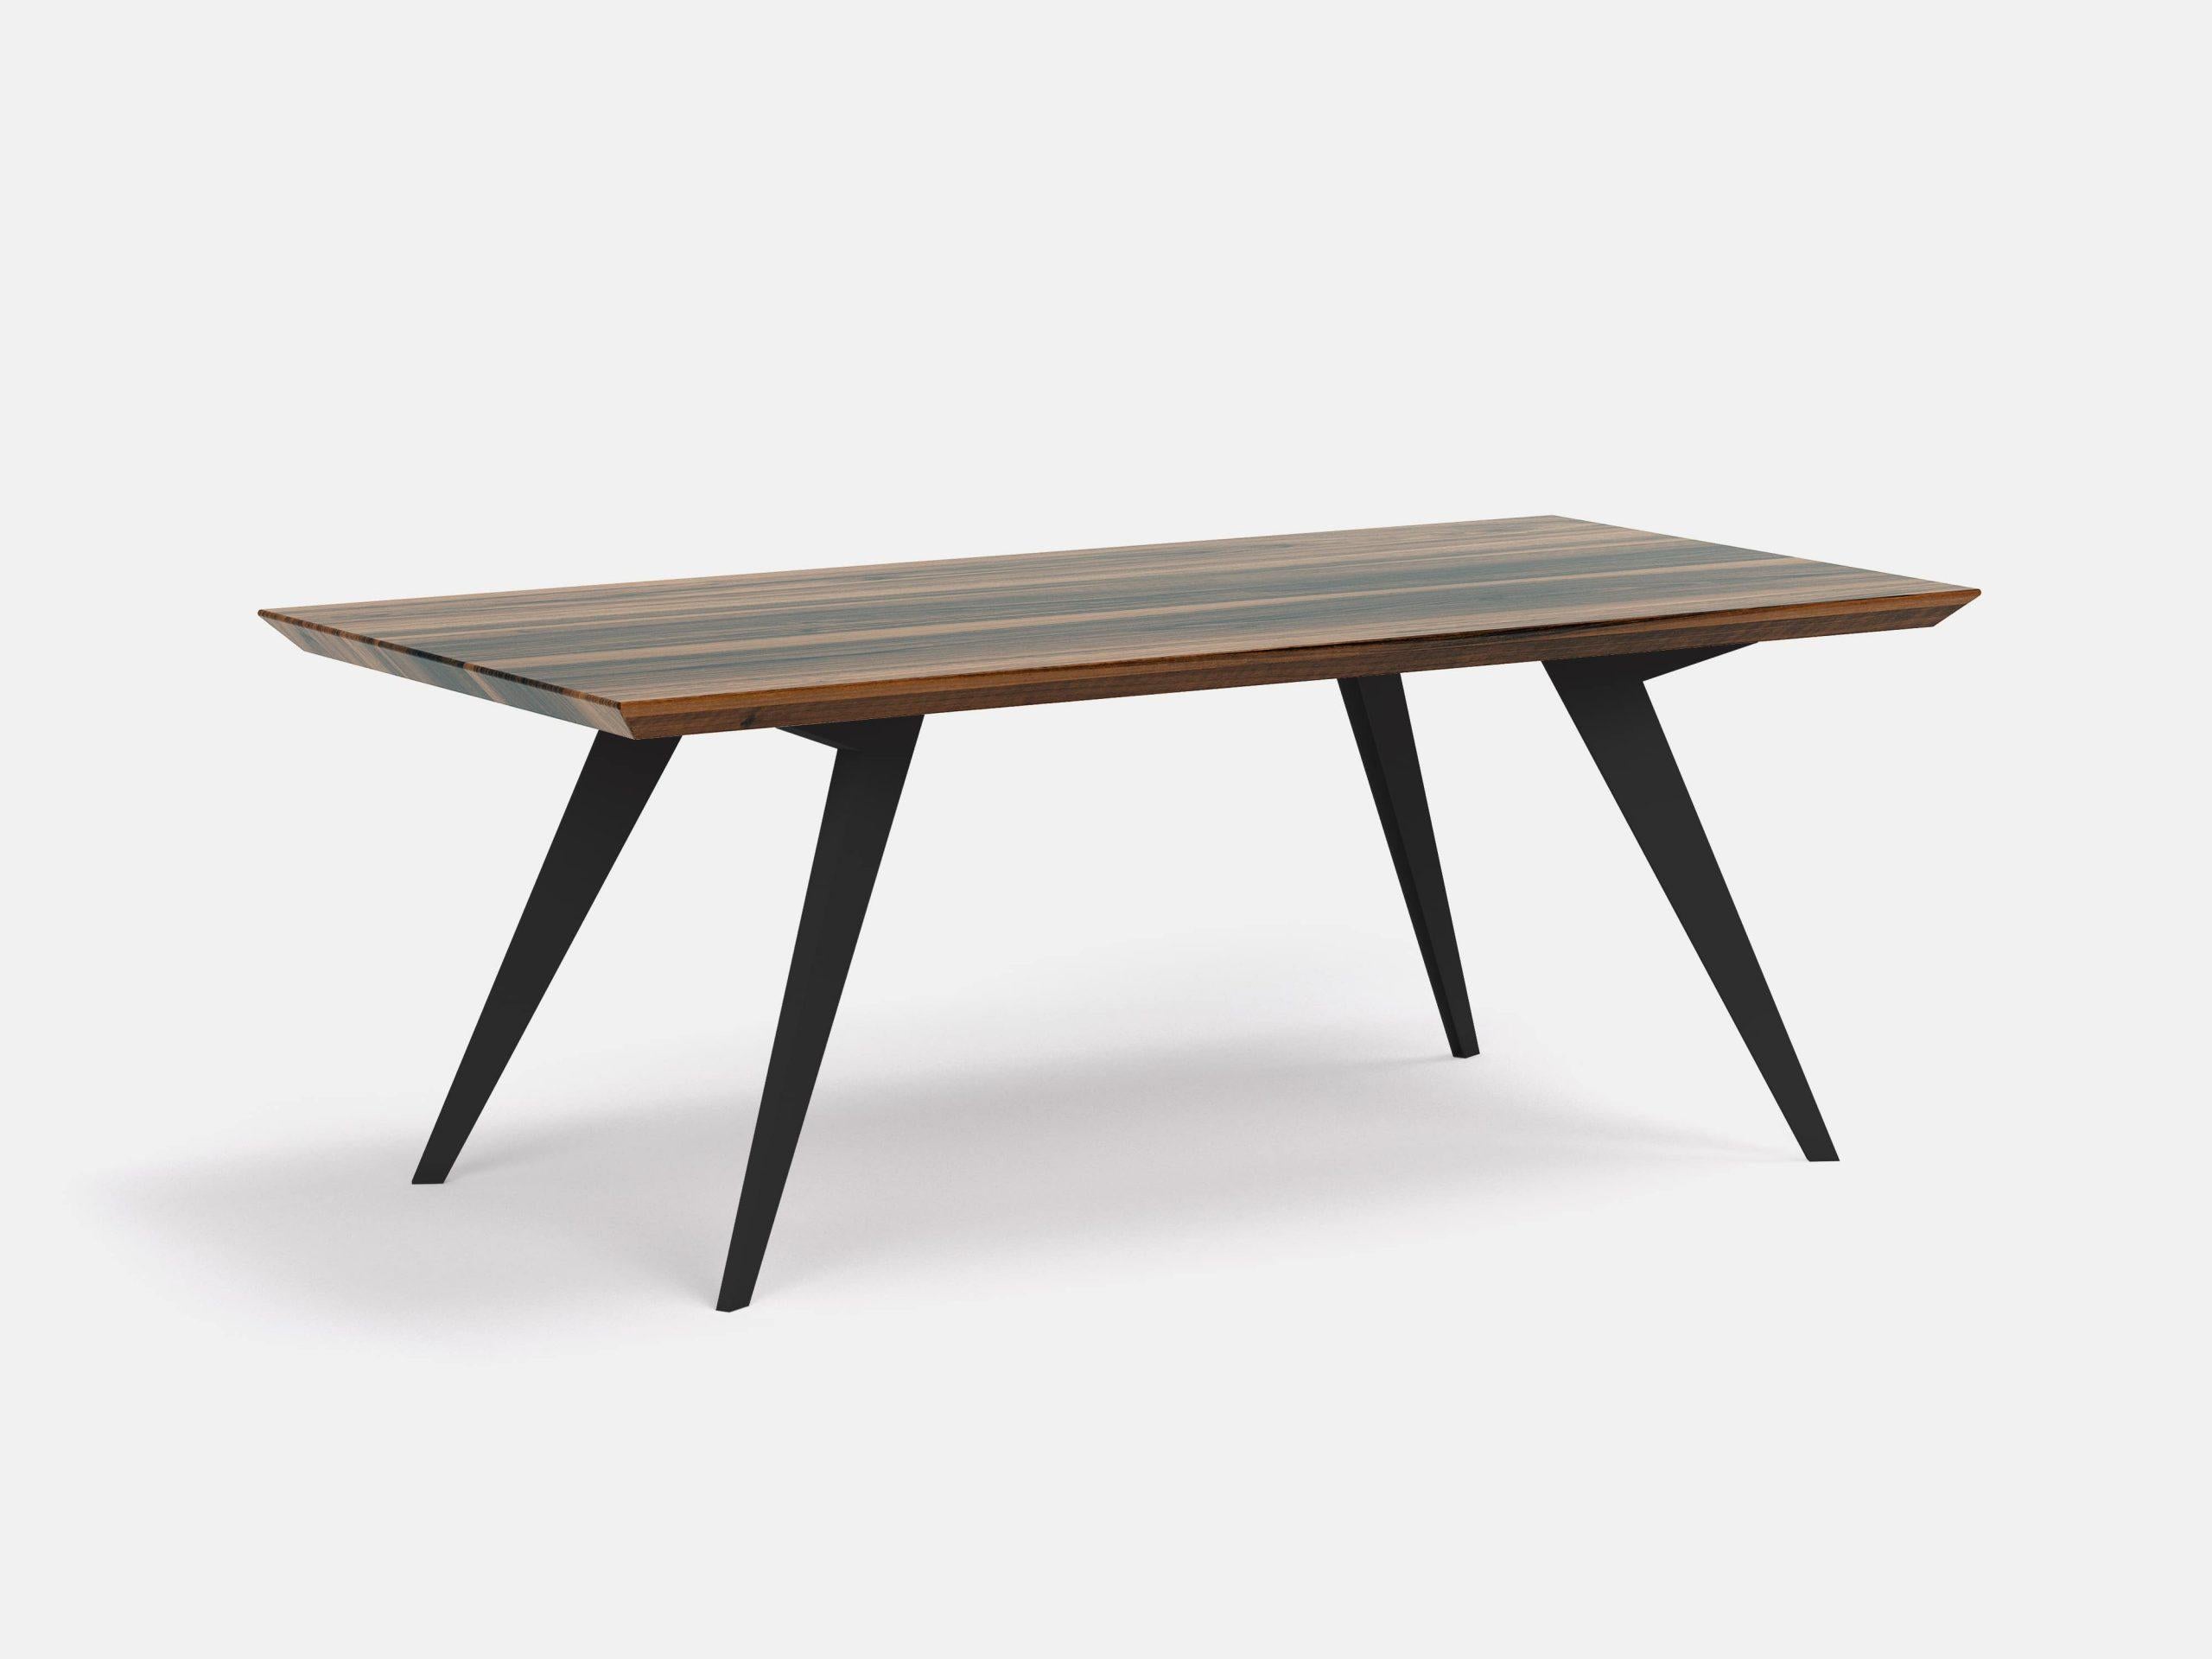 Walnut and steel Minimalist 400 dining table 
Dimensions: W 400 x D 100 x H 75 cm
Materials: American walnut 100% solid wood and steel legs

Dimensions available: 160, 200, 250, 300, 350, 400 cm

Roly-Poly table is the proof that through